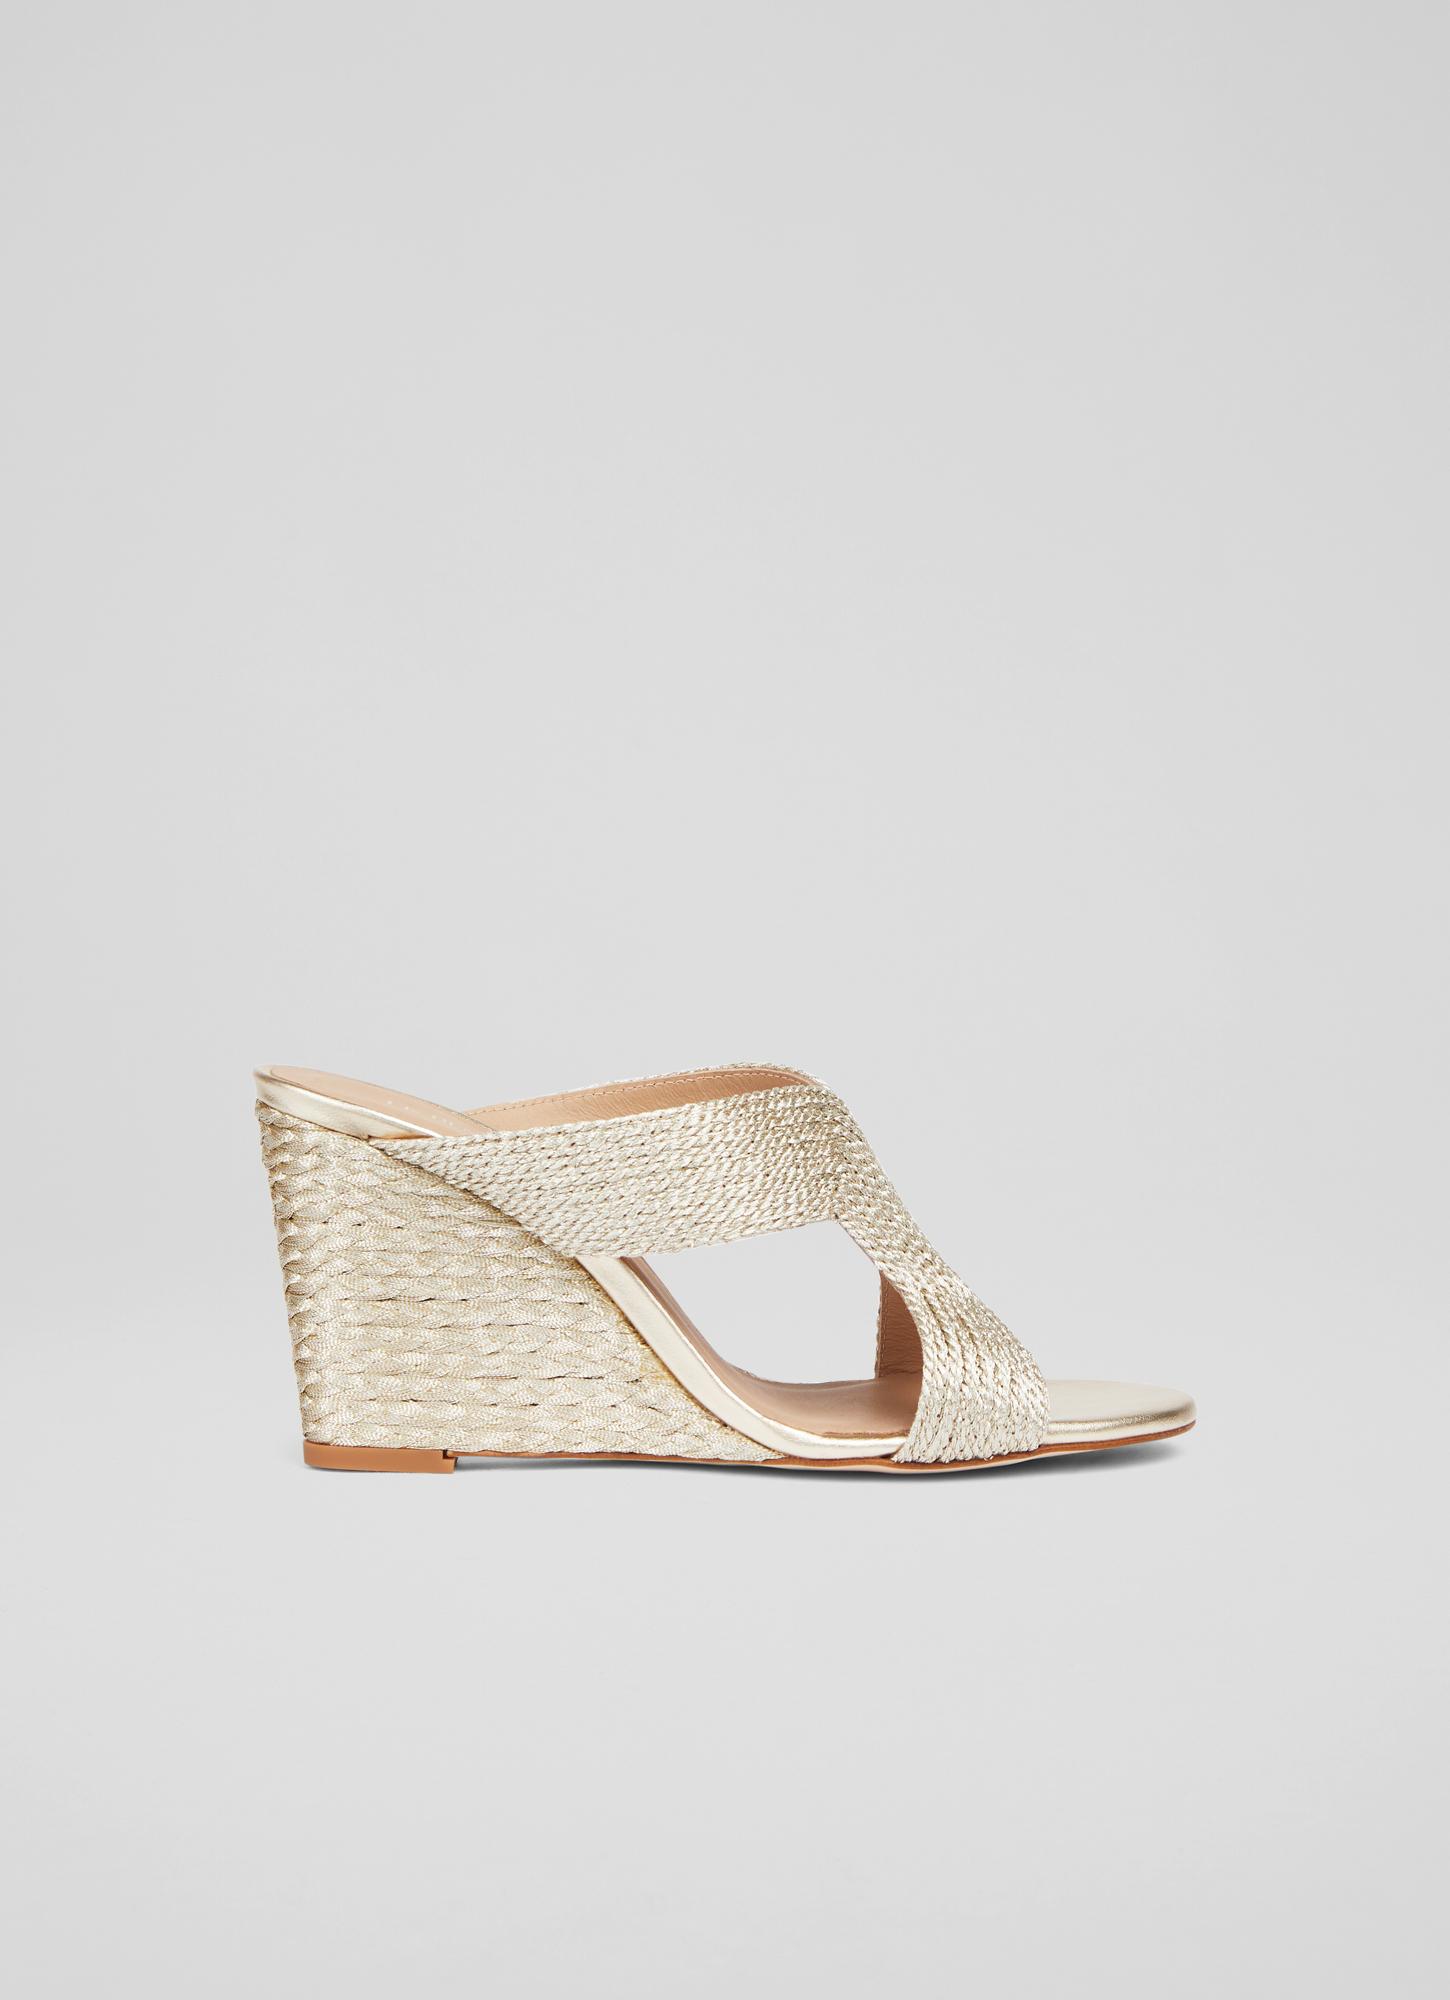 L.K.Bennett Sonia Gold Rope Wedge Mules Soft Gold, Soft Gold